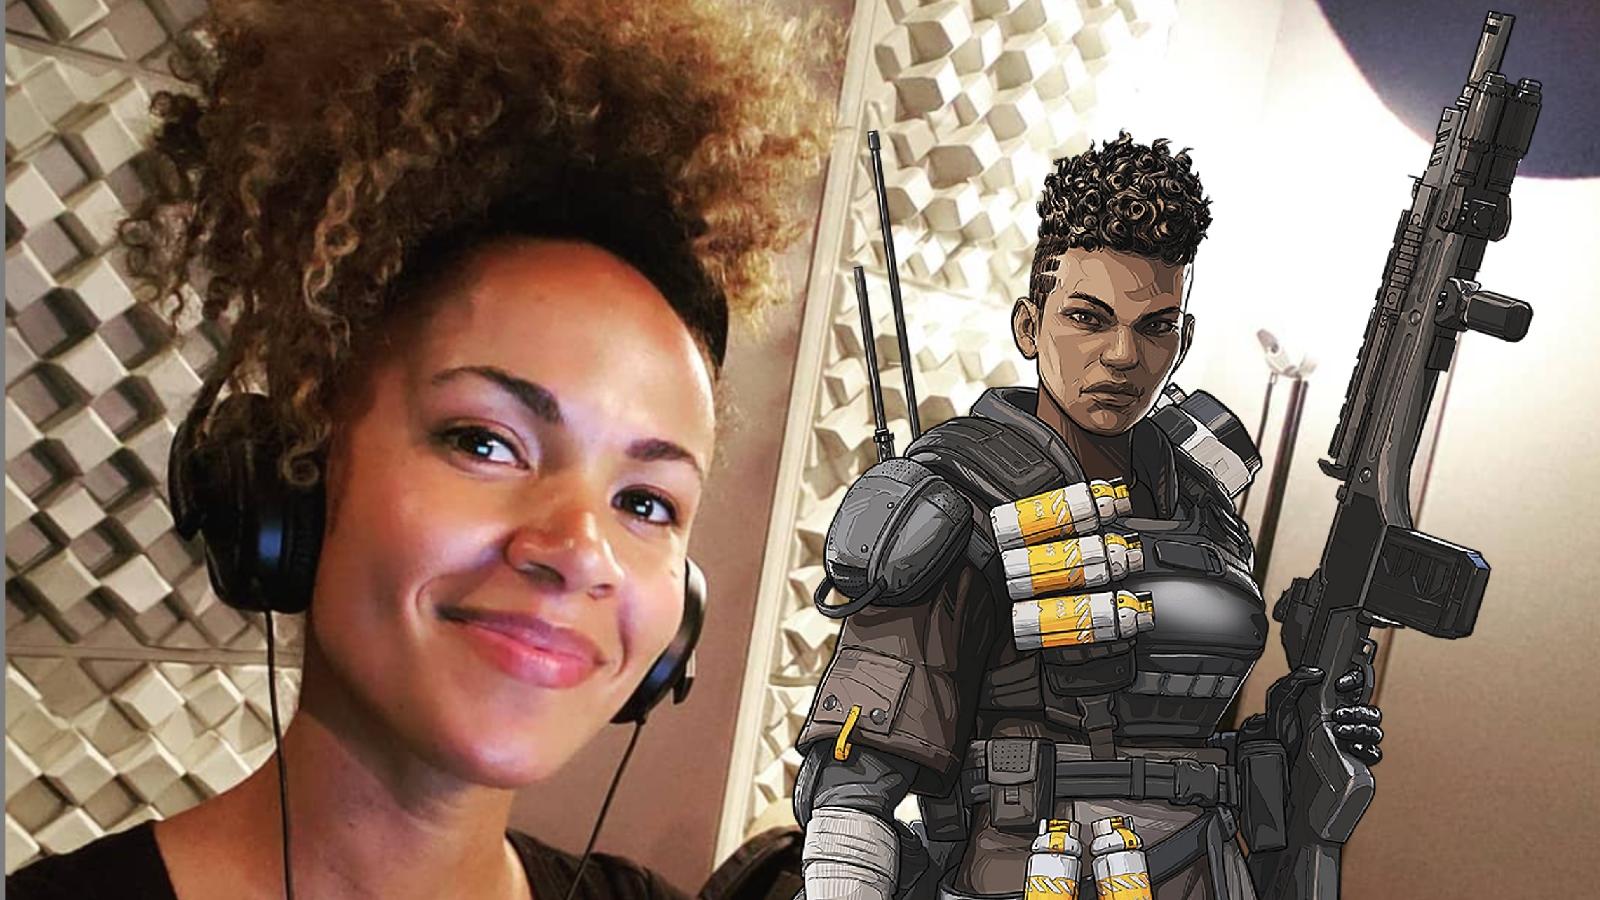 Bangalore voice actor Erica Luttrell